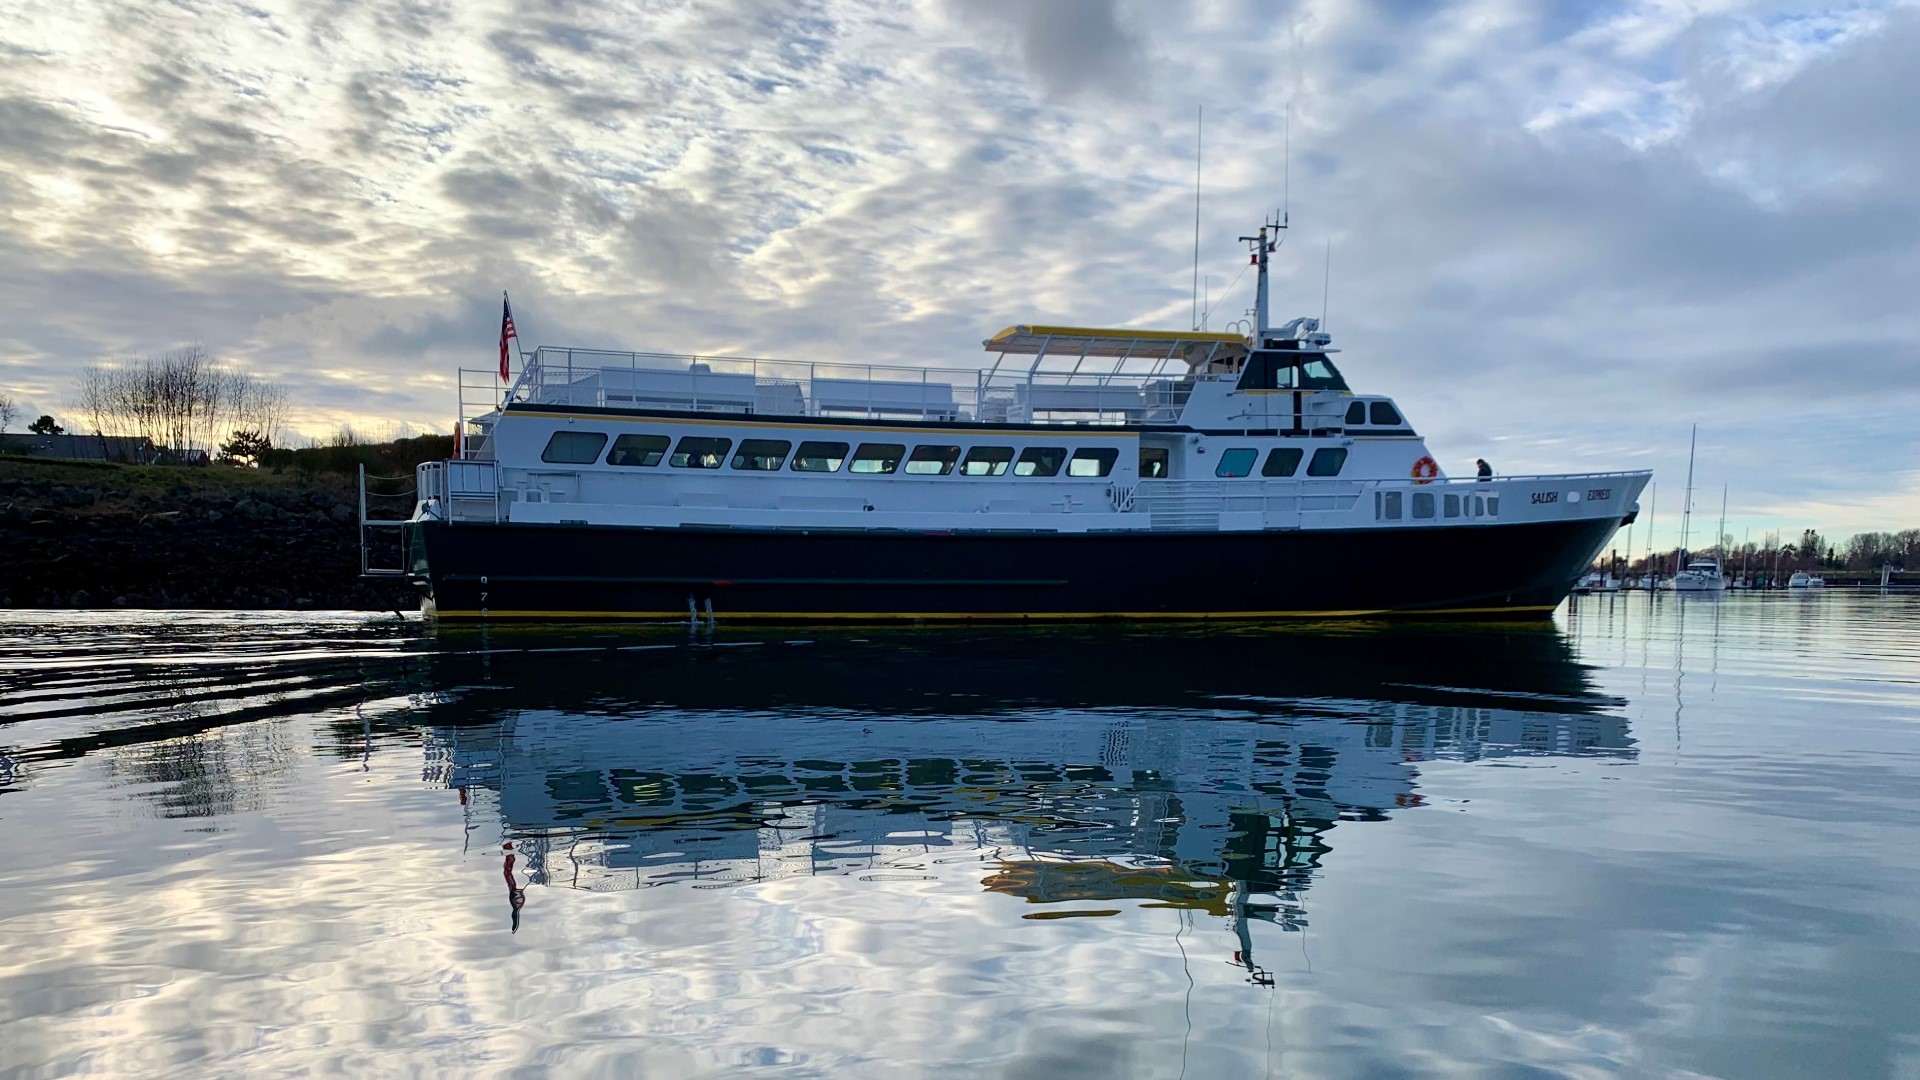 Point Roberts, Washington is now one of the most isolated towns in the Lower 48. This free ferry service provides a vital link.